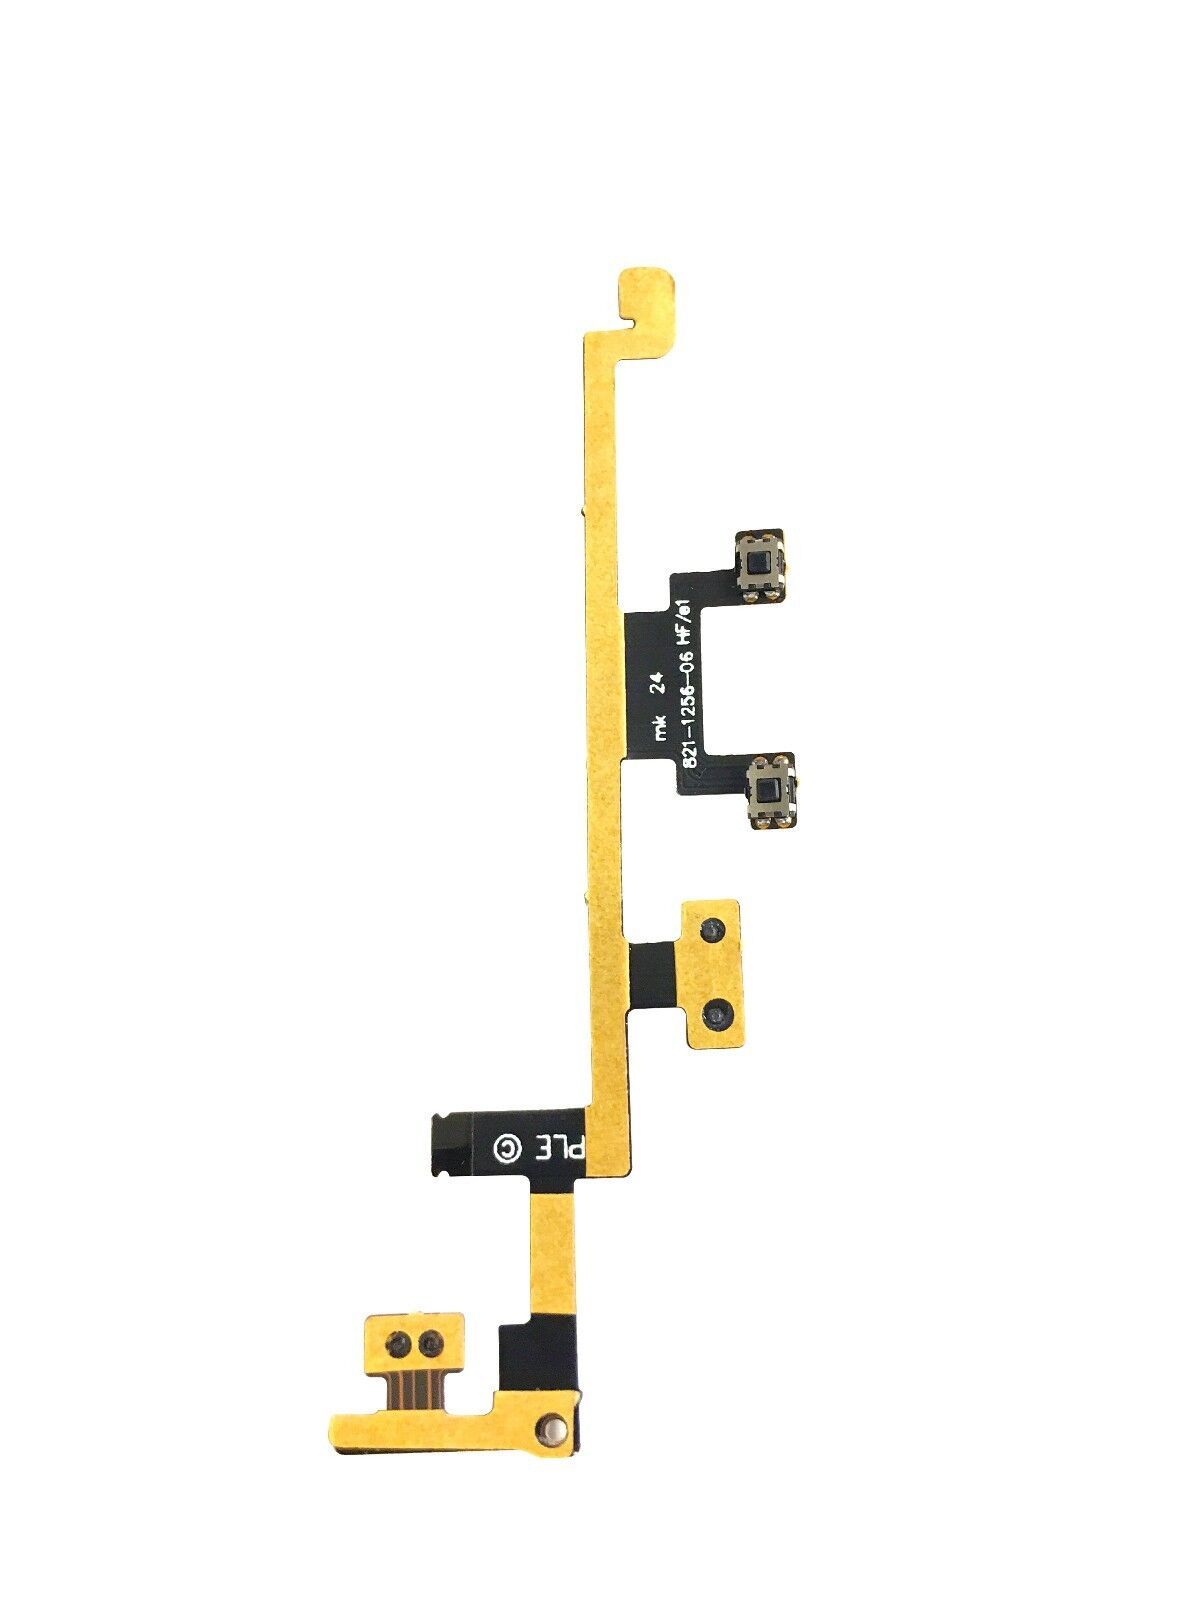 New Power button On/Off Volume Control Flex Cable Part for iPad 3rd iPad 4th